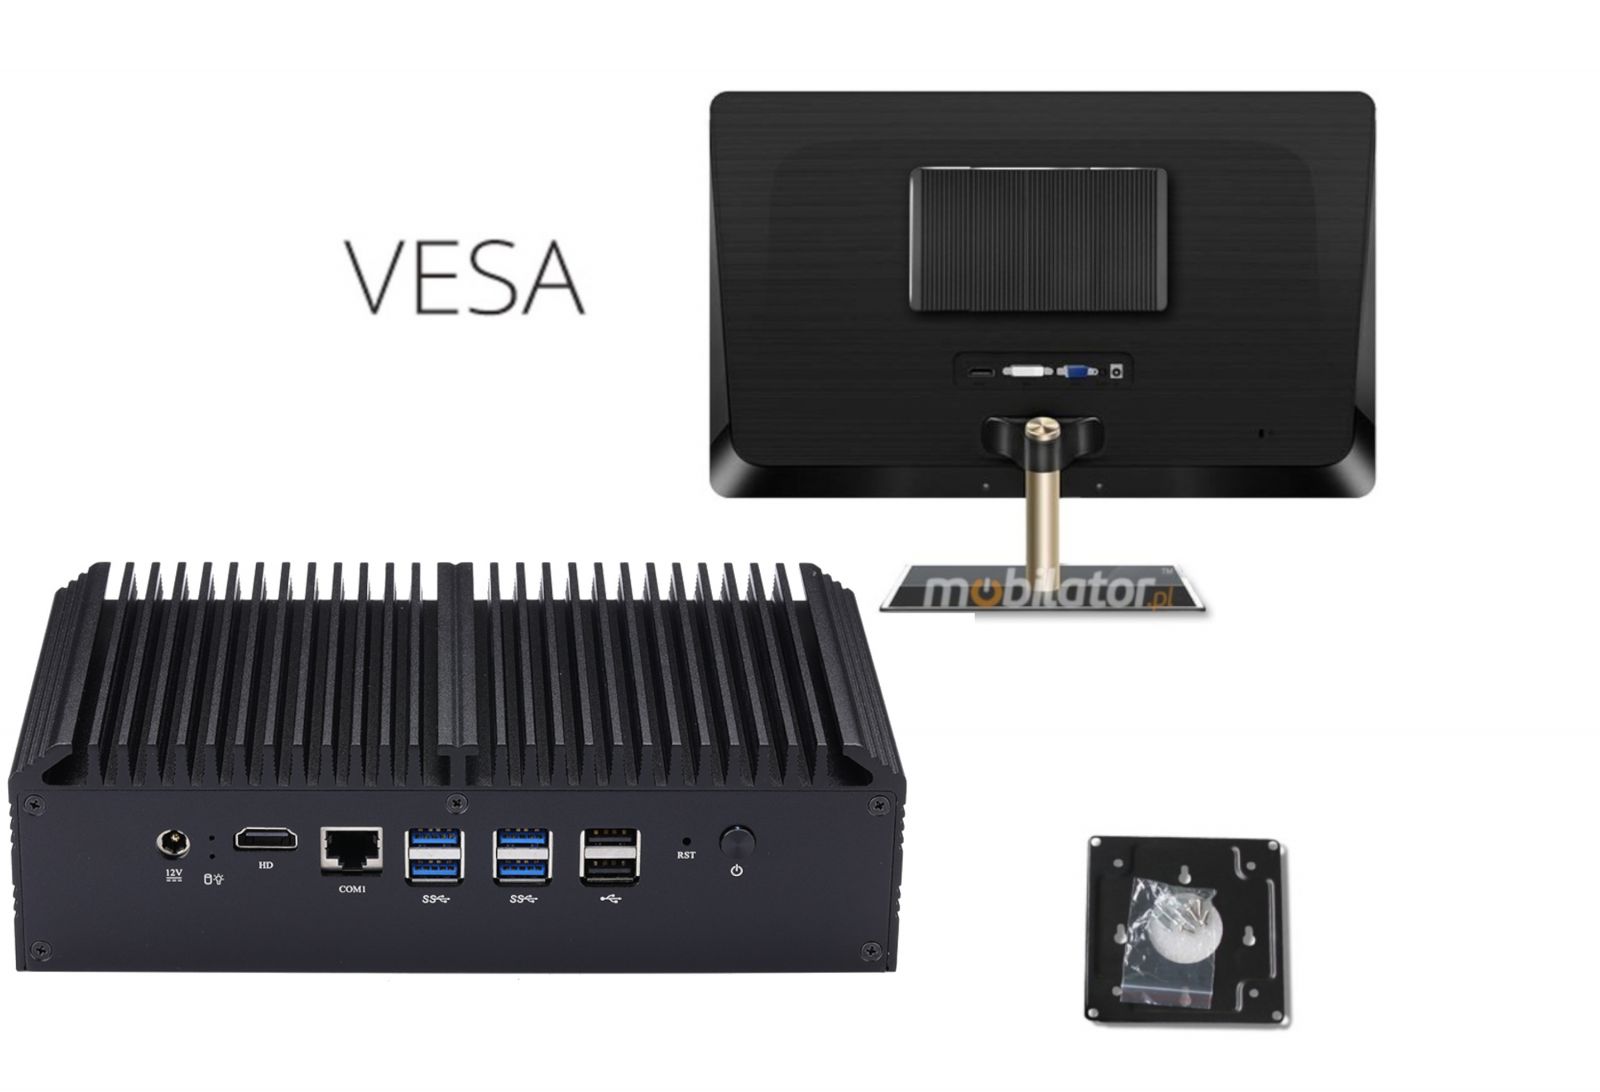 with VESA mount, Q838GE can be attached to the back of the computer monitor